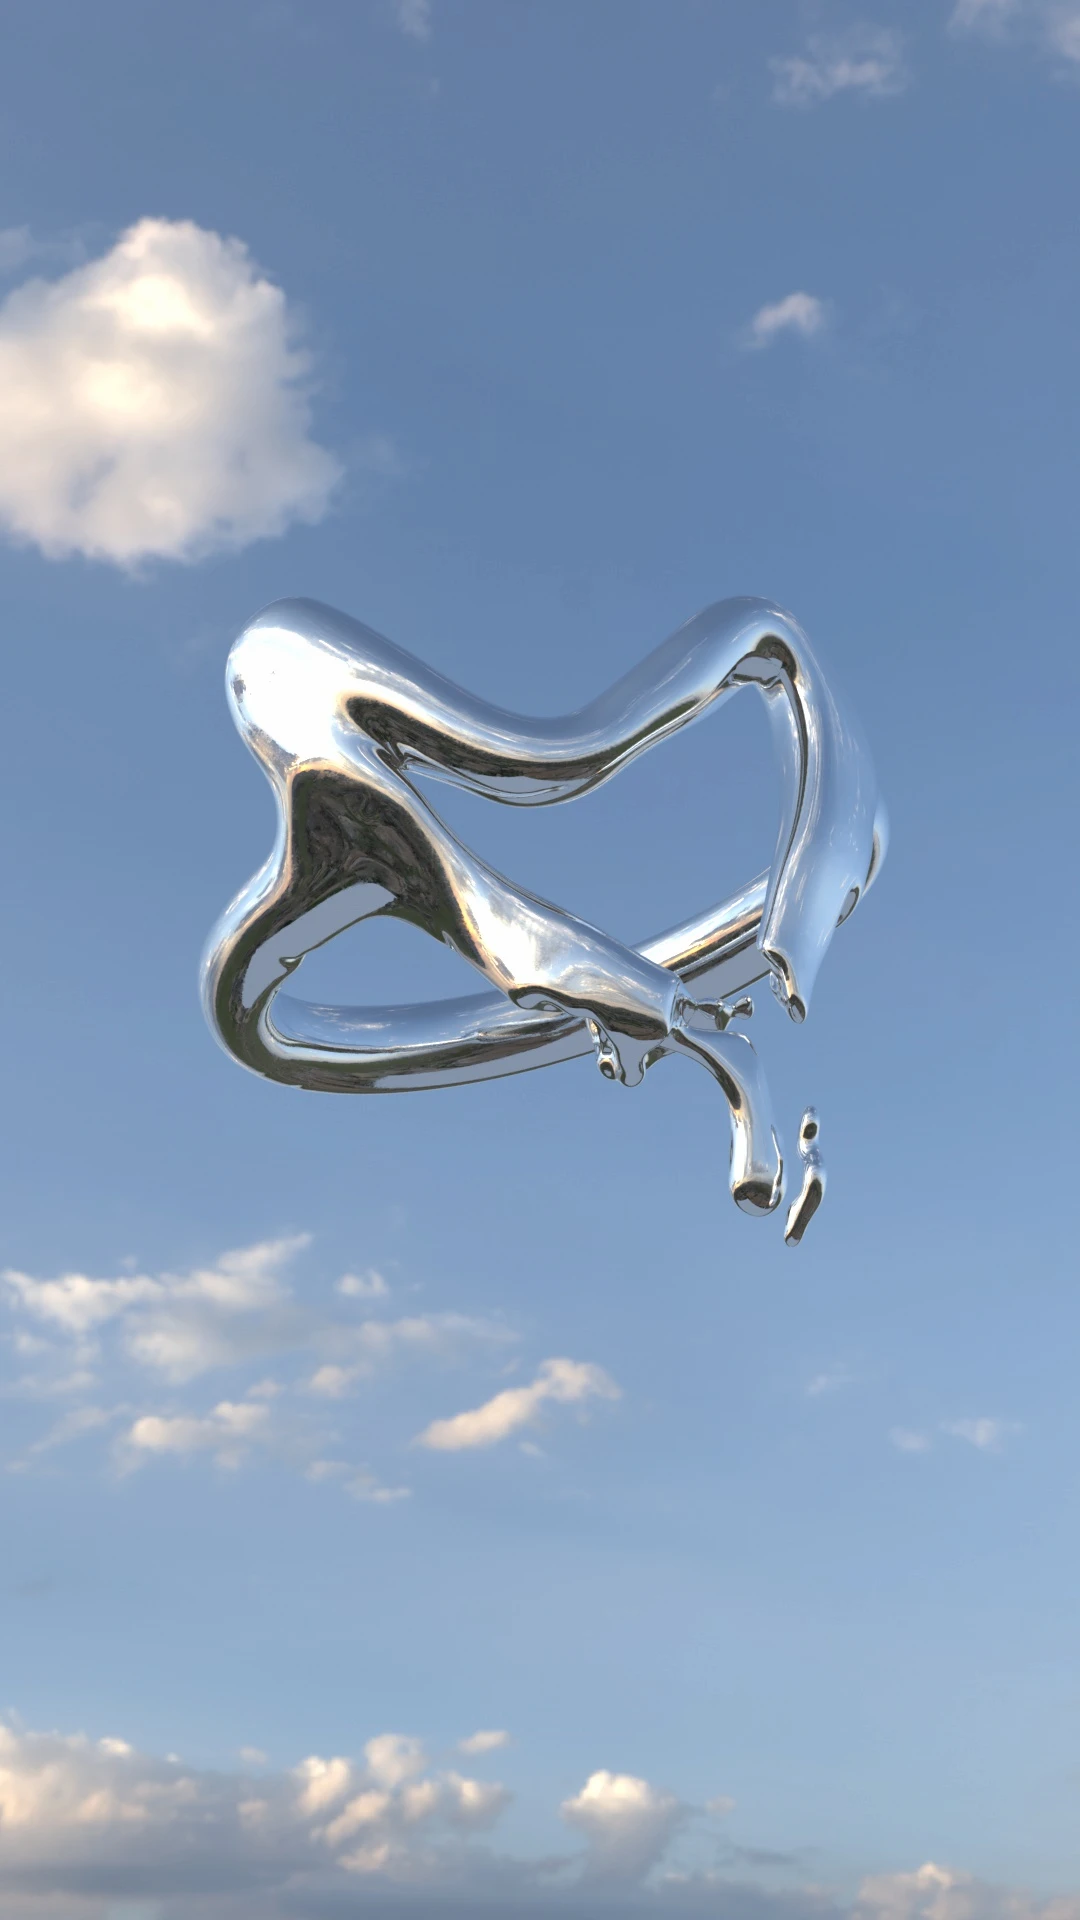 A silver blob made of liquid floating in the sky